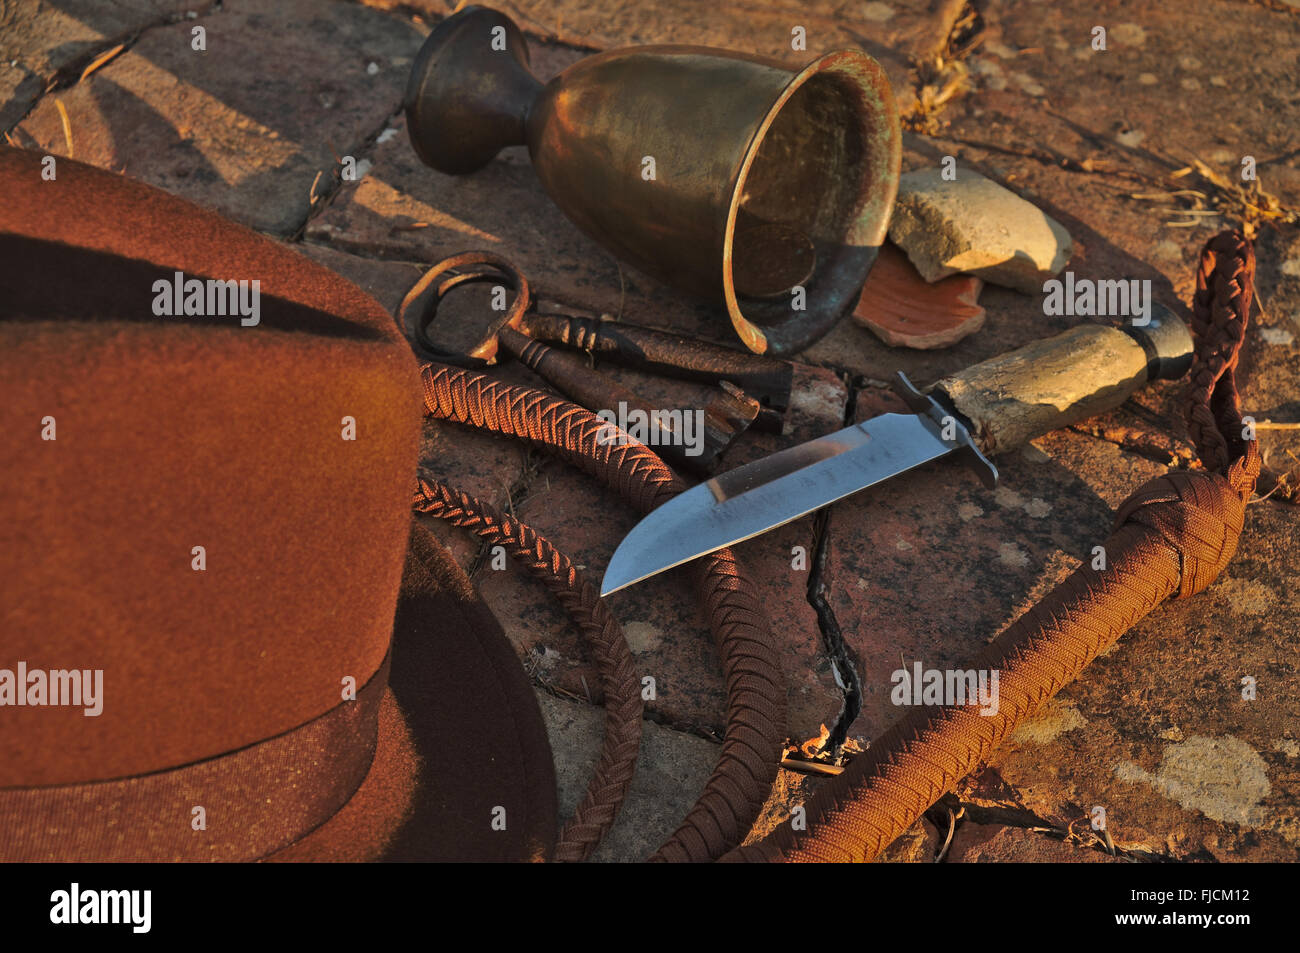 Indiana Jones related items: Fedora hat, whip, knife, antique skeleton keys and other artifacts. Themed photography Stock Photo